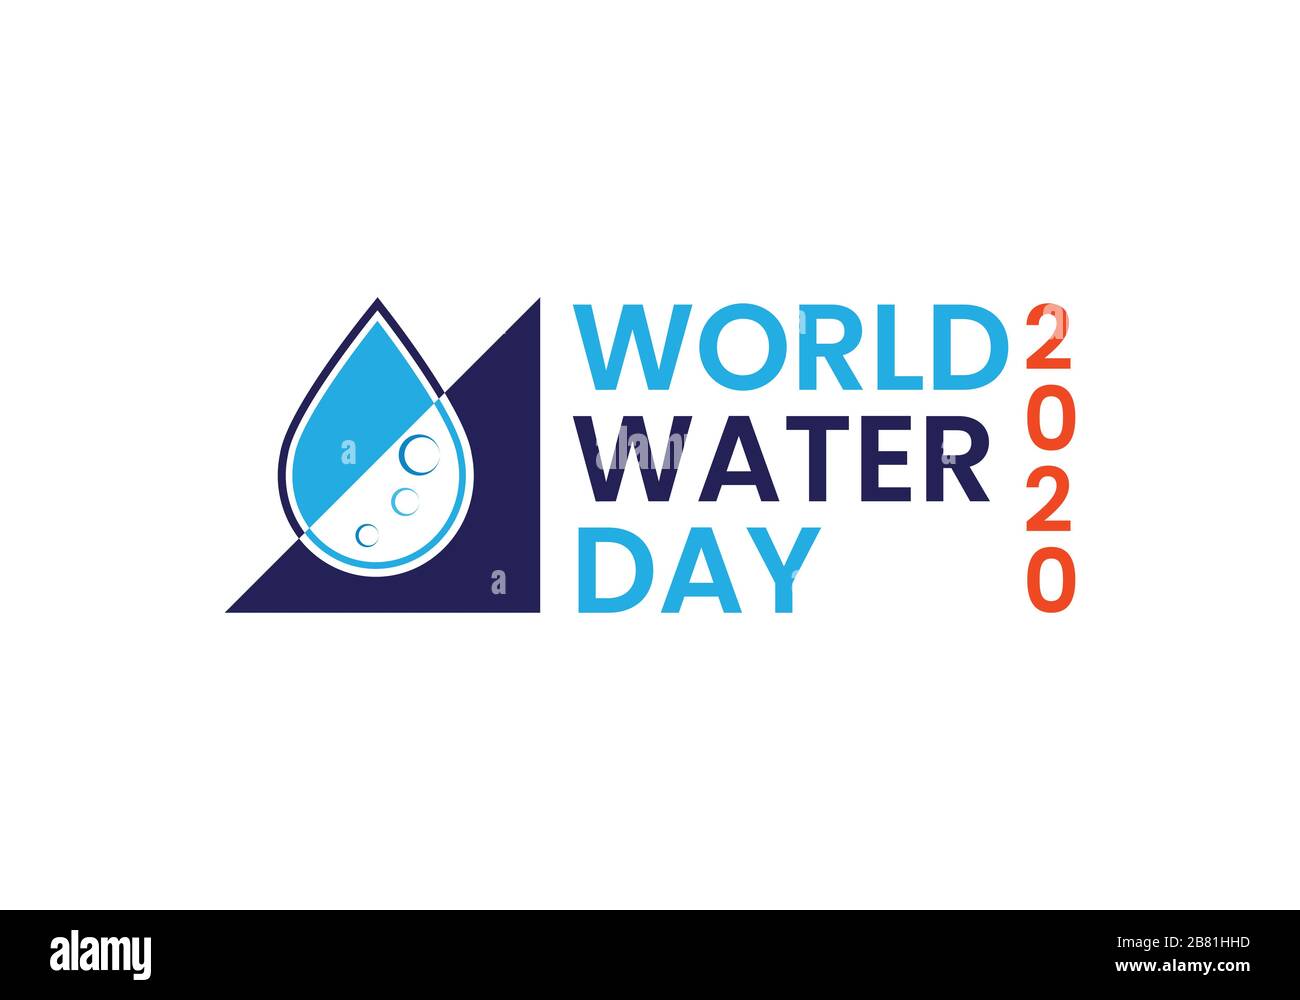 World water day 2020 logo sign symbol, Water and Climate Change. Vector flat design. Stock Vector